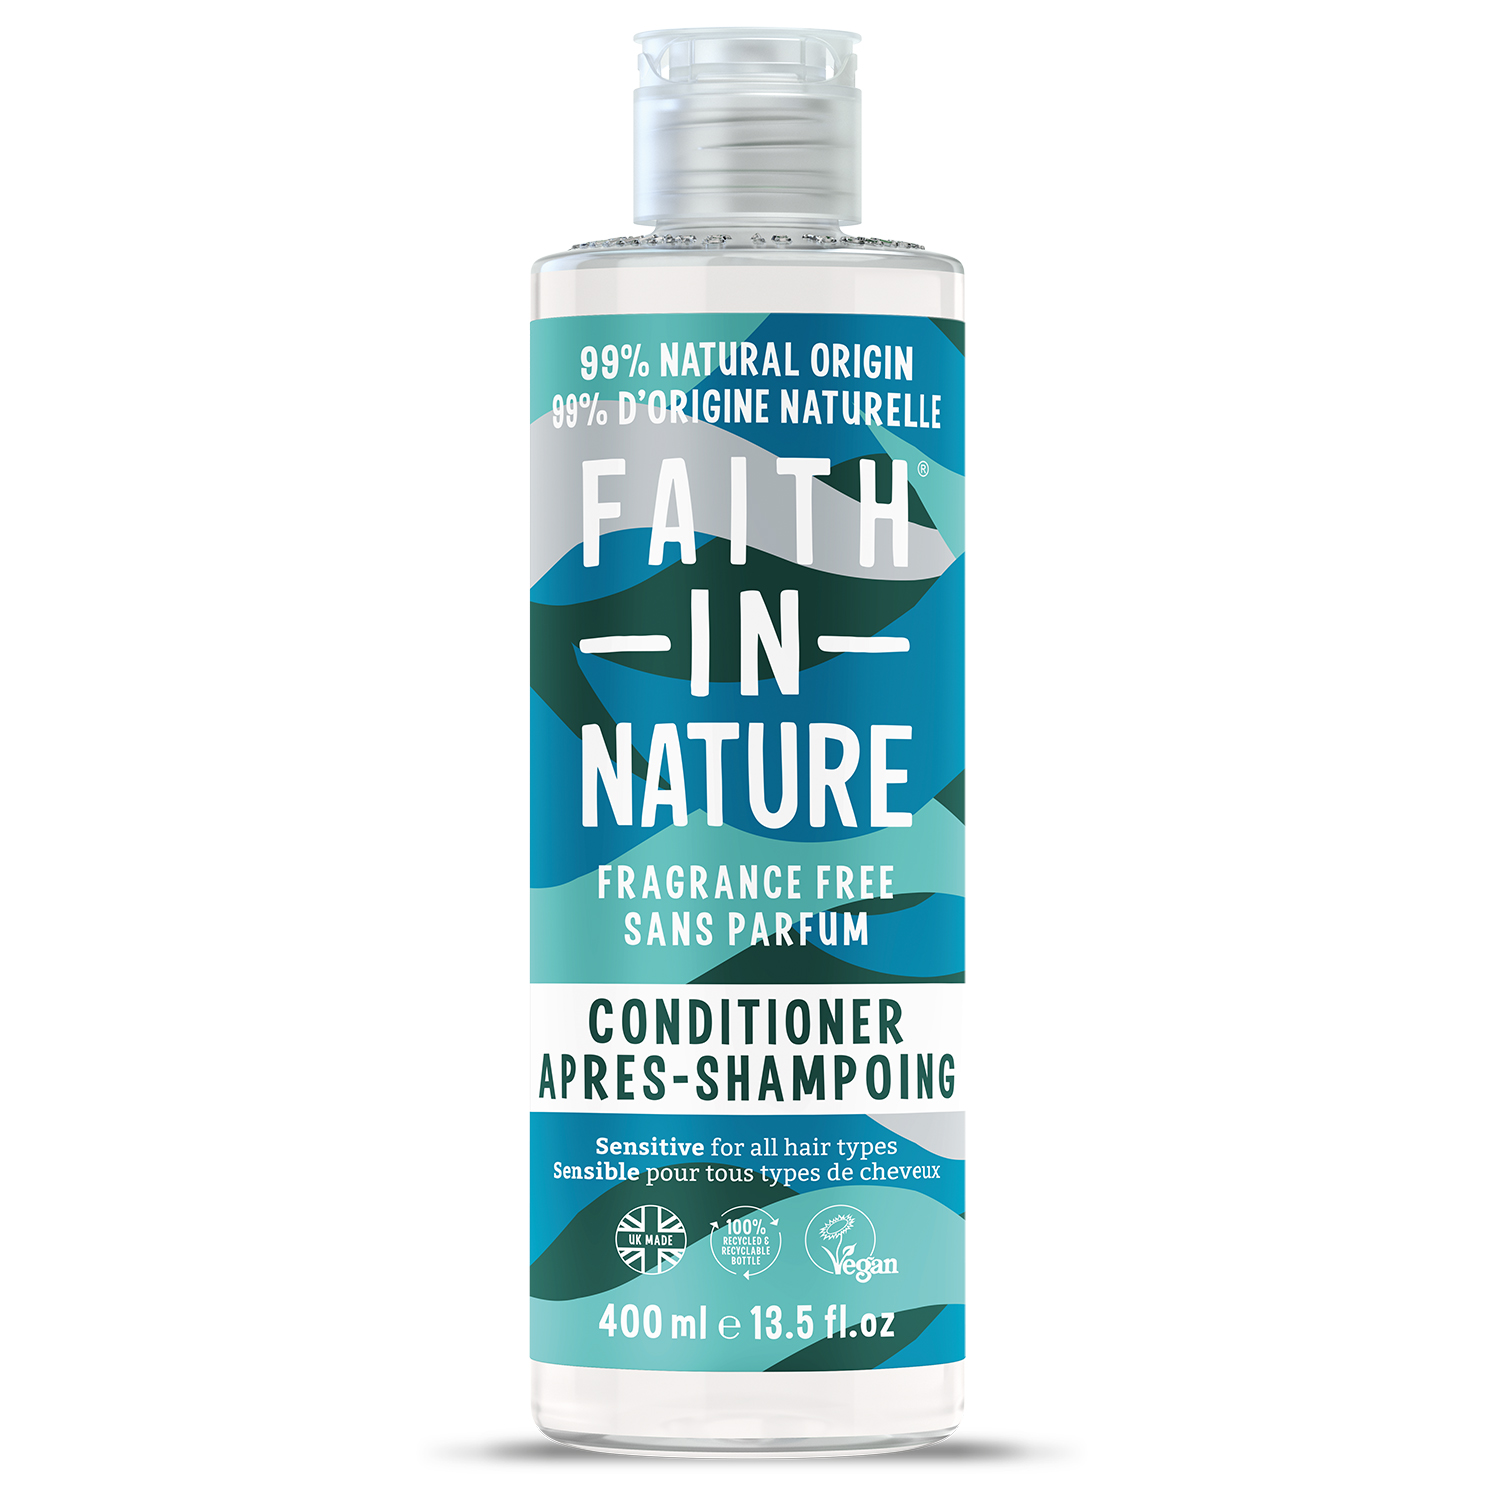 Faith In Nature Fragrance Free Conditioner 400 ml